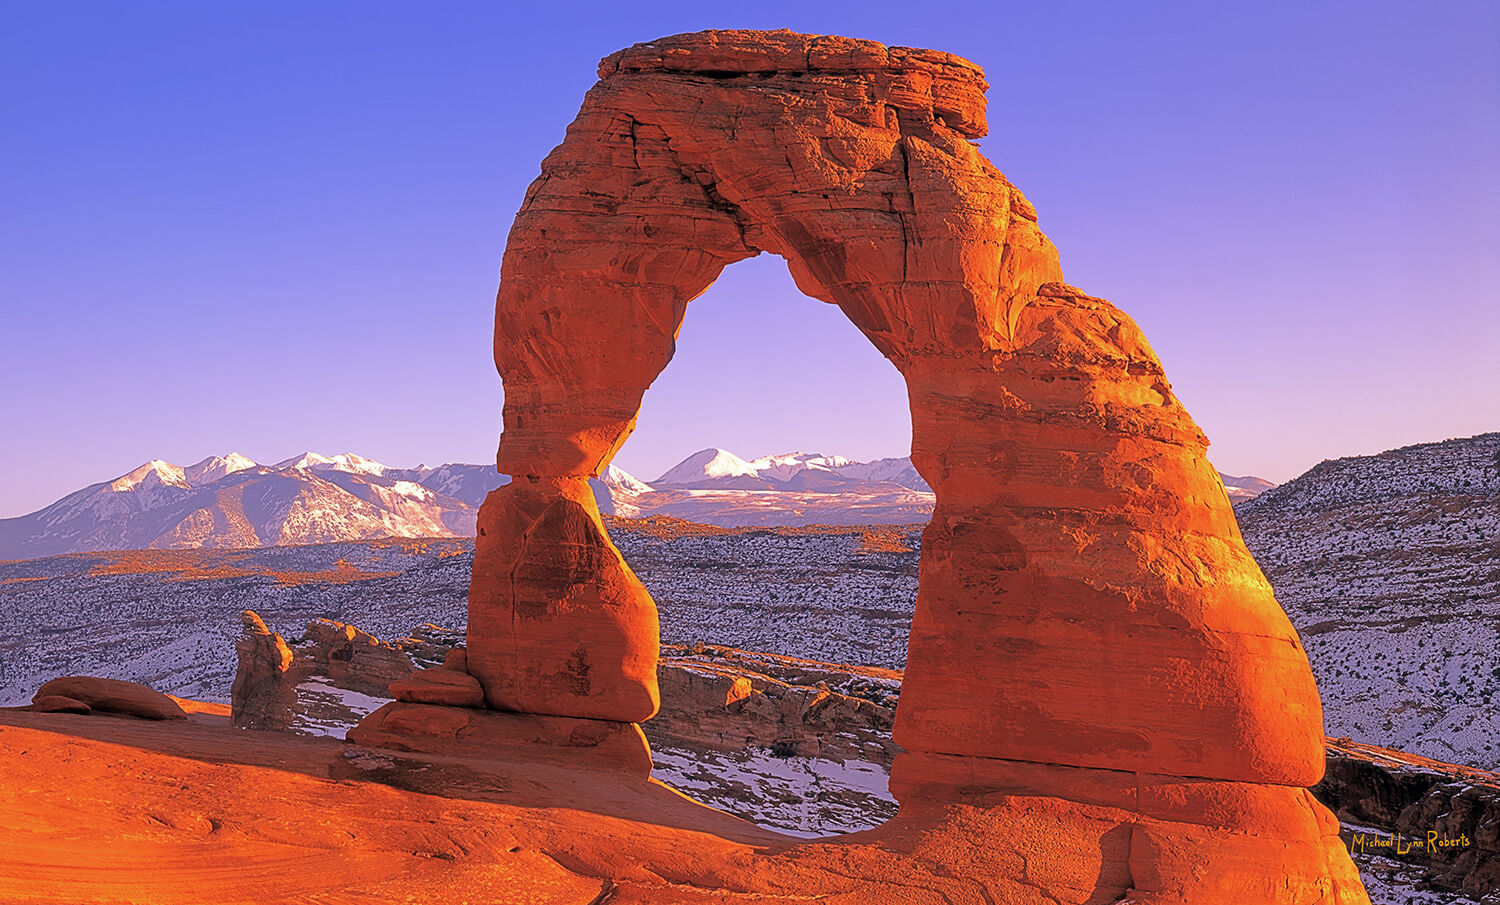 Delicate Arch is a 60' tall, freestanding natural arch located in Arches National Park in Utah. This iconic symbol is one of...